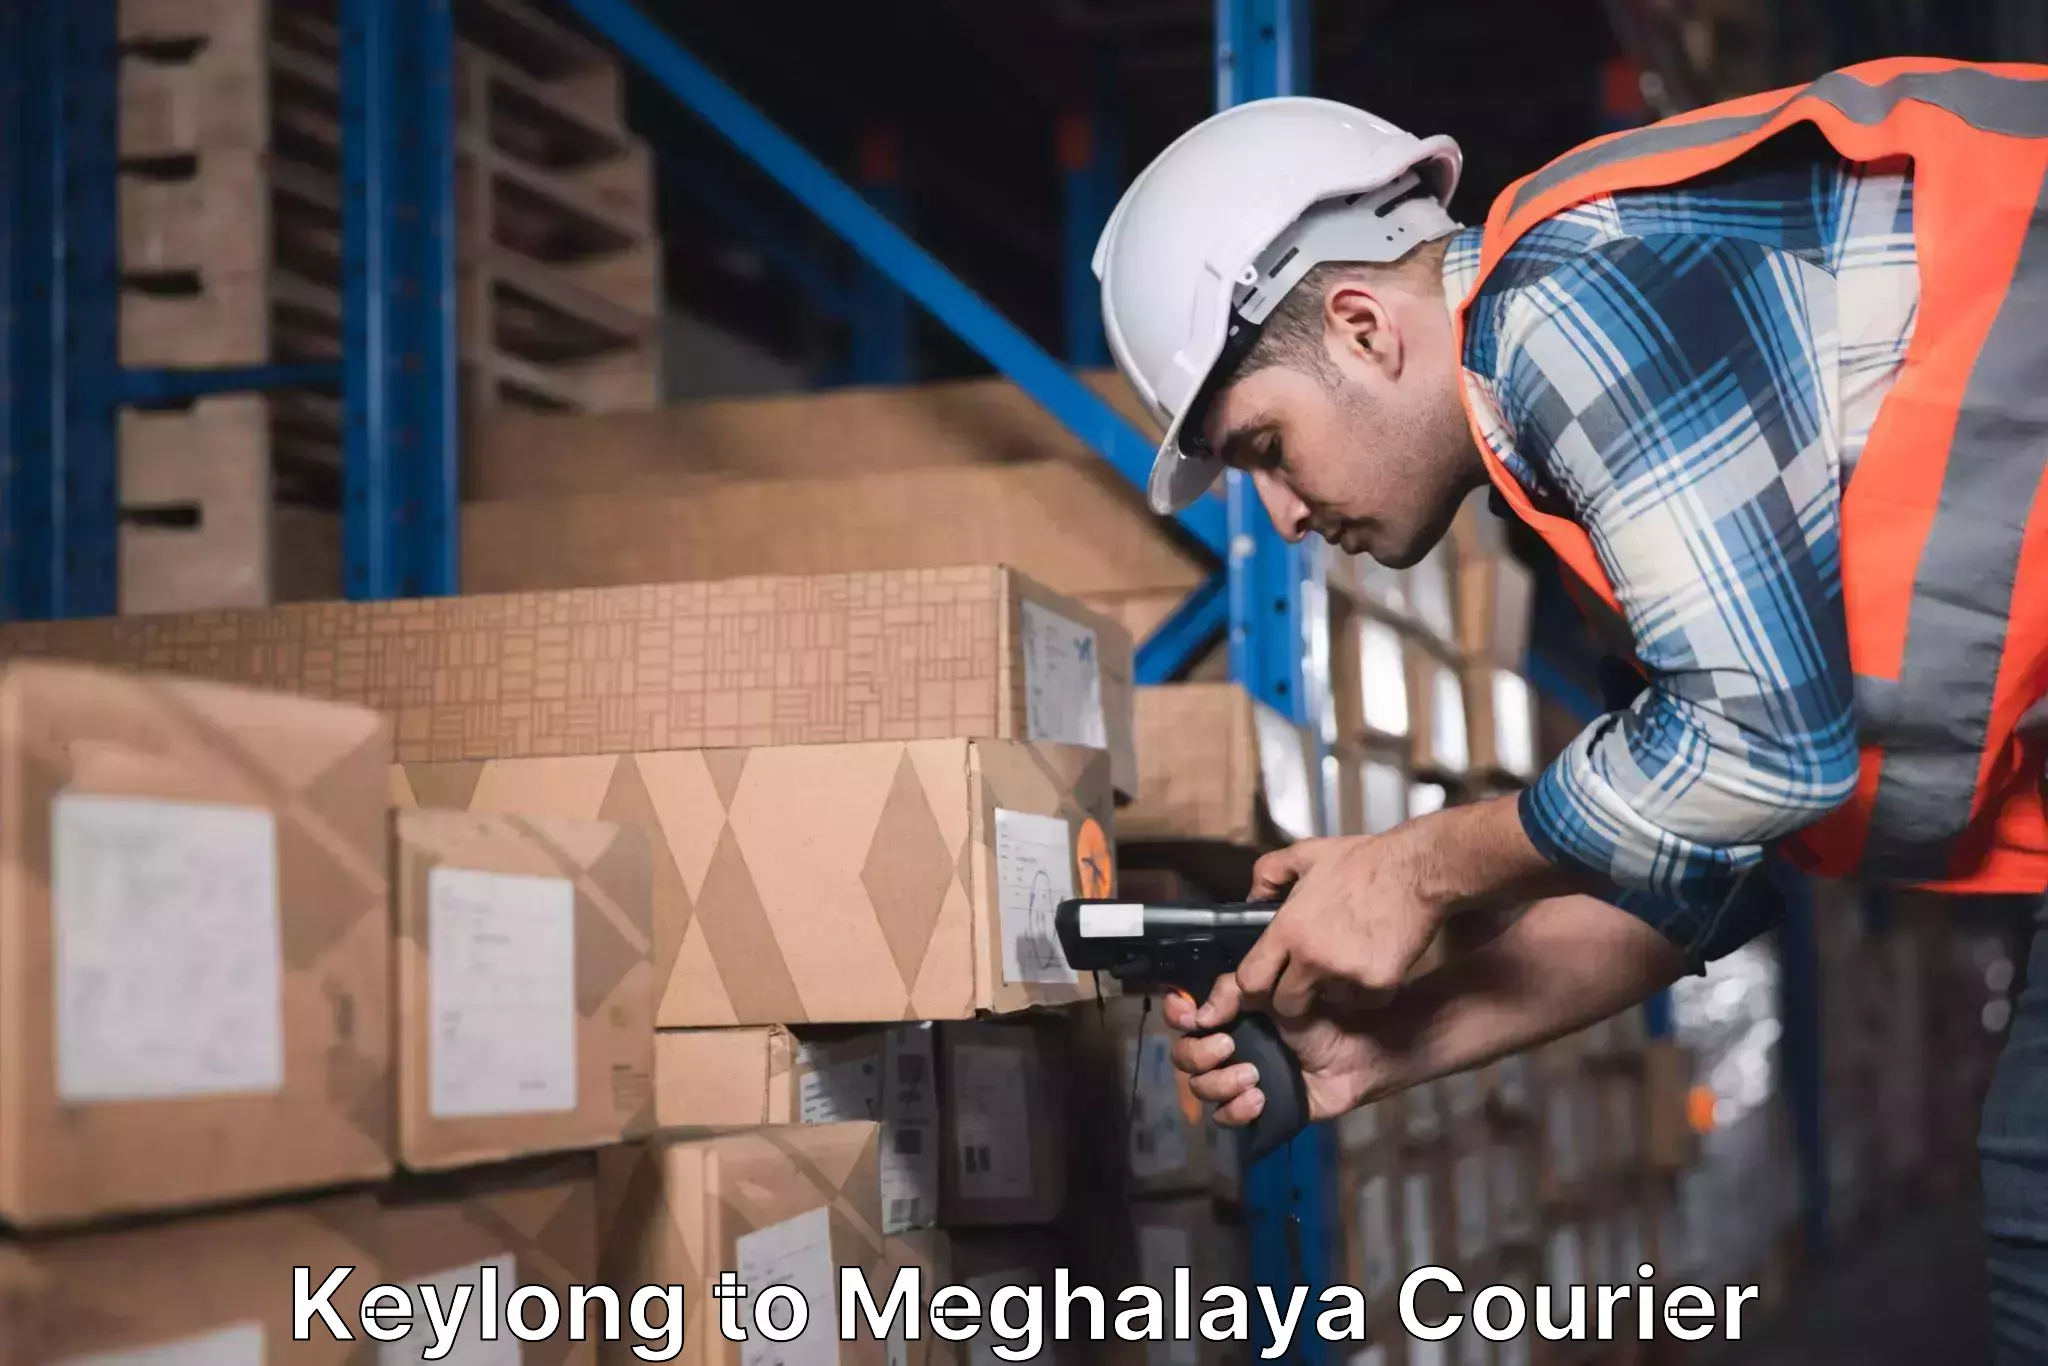 Professional courier services Keylong to Tura